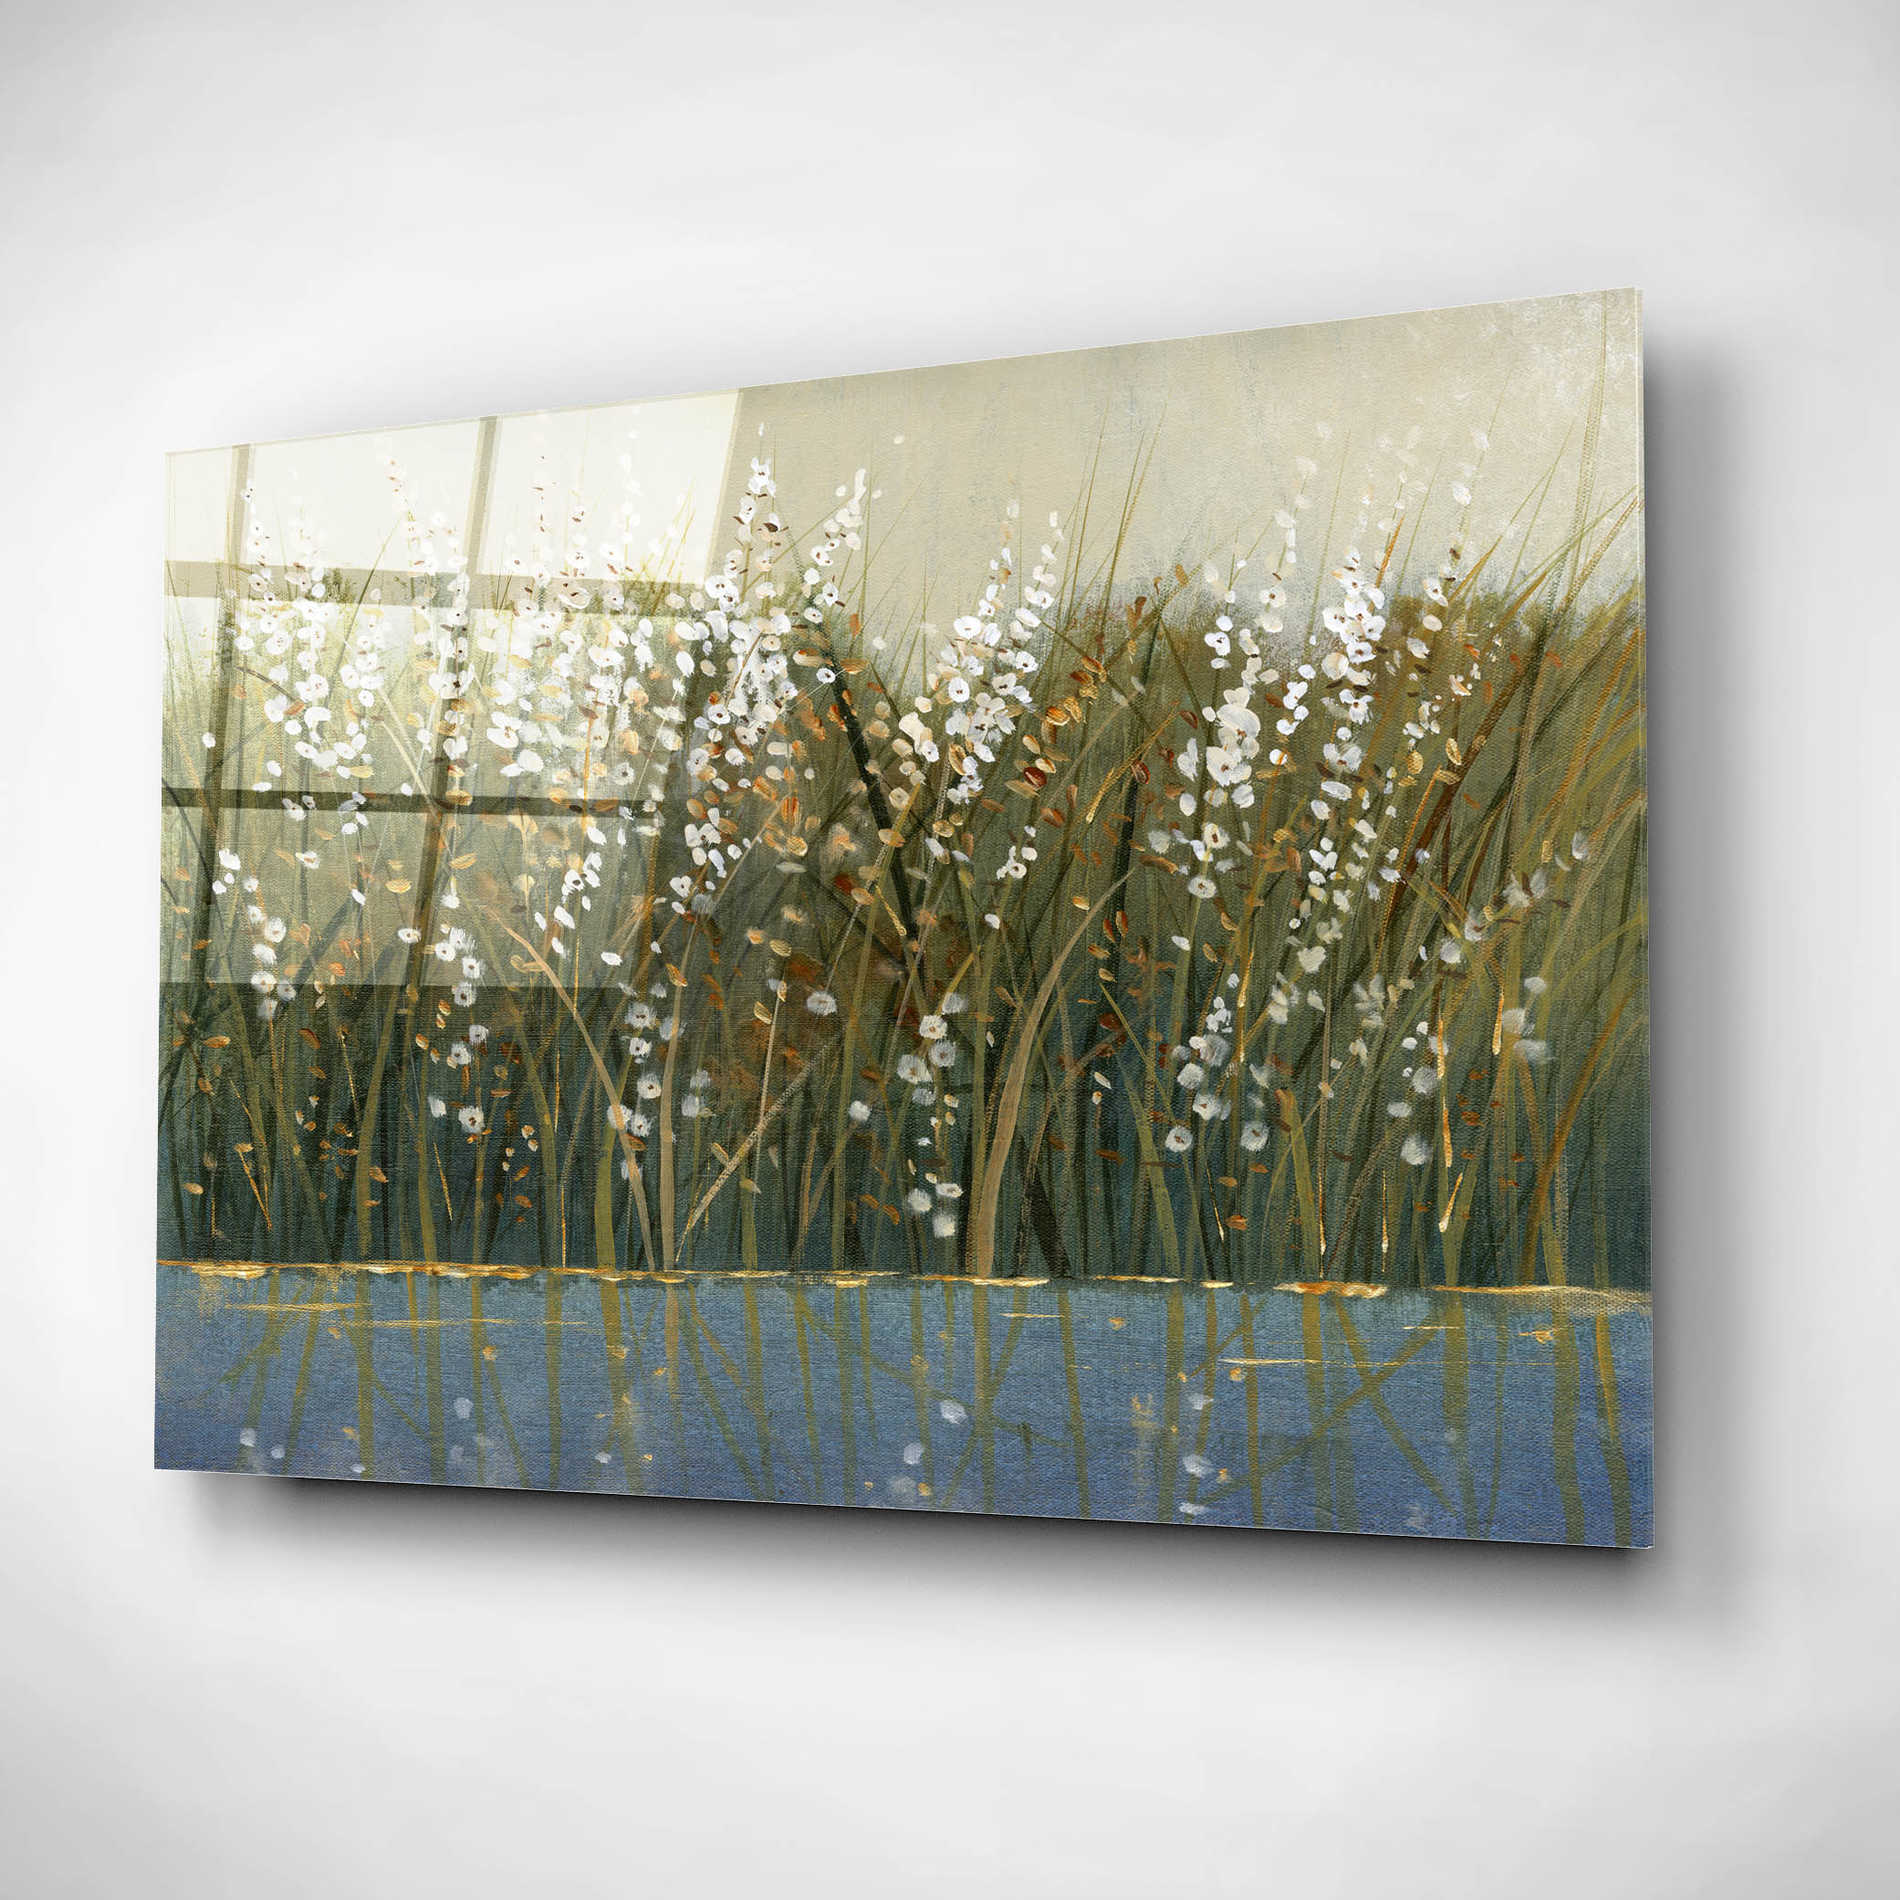 Epic Art 'By the Tall Grass I' by Tim O'Toole, Acrylic Glass Wall Art,16x12